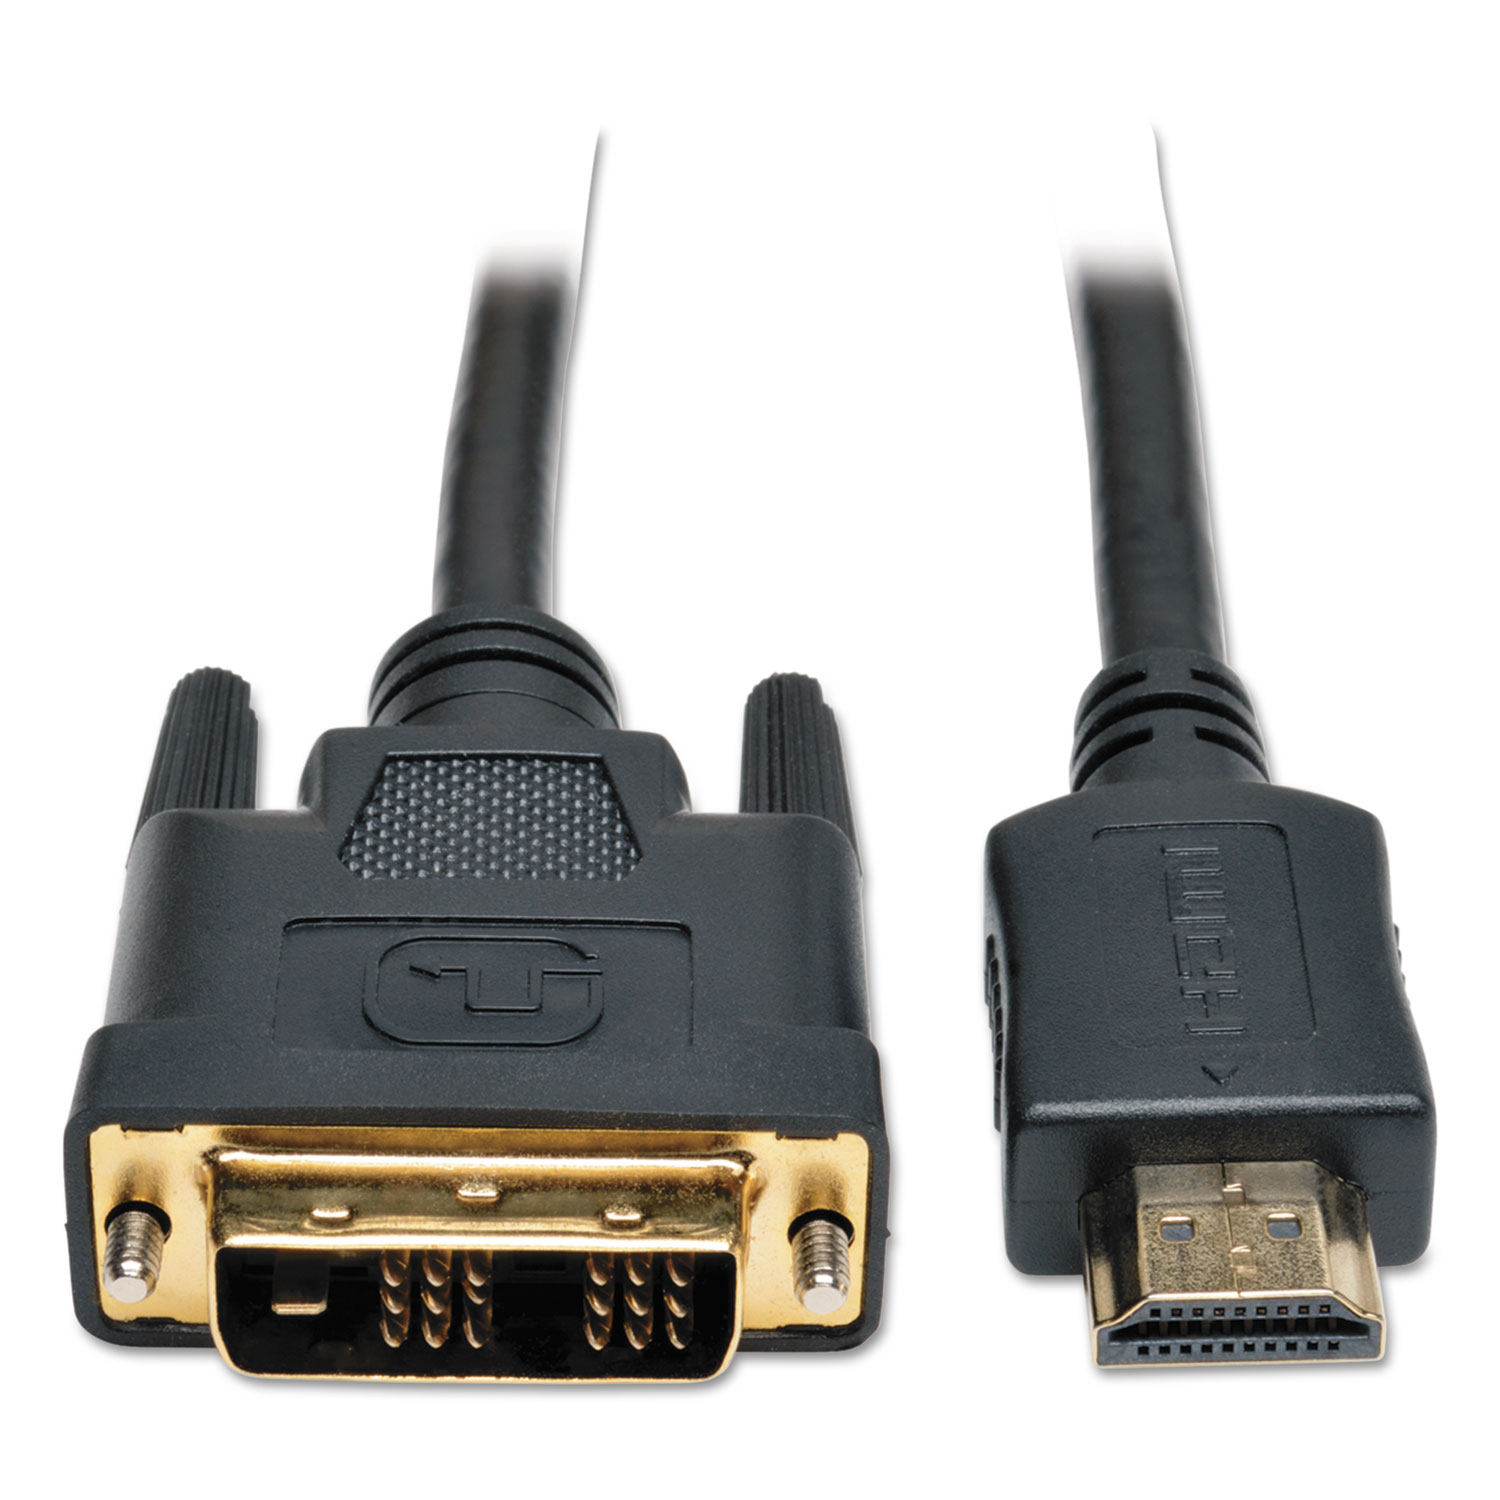  Tripp Lite P566-006 HDMI to DVI-D Cable, Digital Monitor Adapter Cable (M/M), 1080P, 6 ft., Black (TRPP566006) 